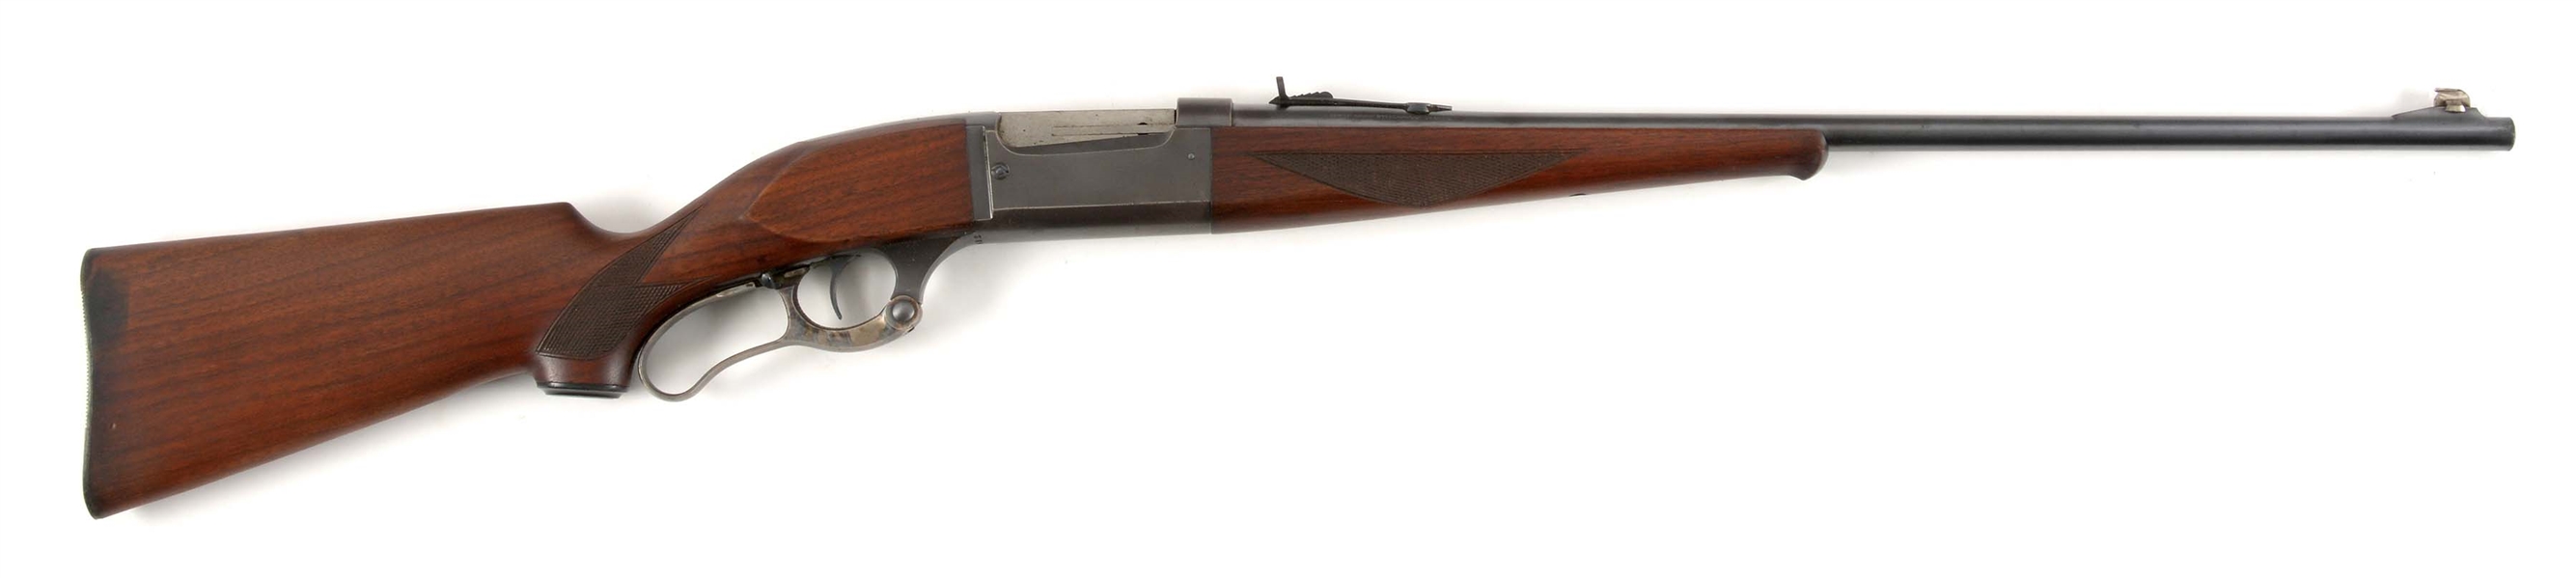 (C) SAVAGE 99 LEVER ACTION RIFLE.